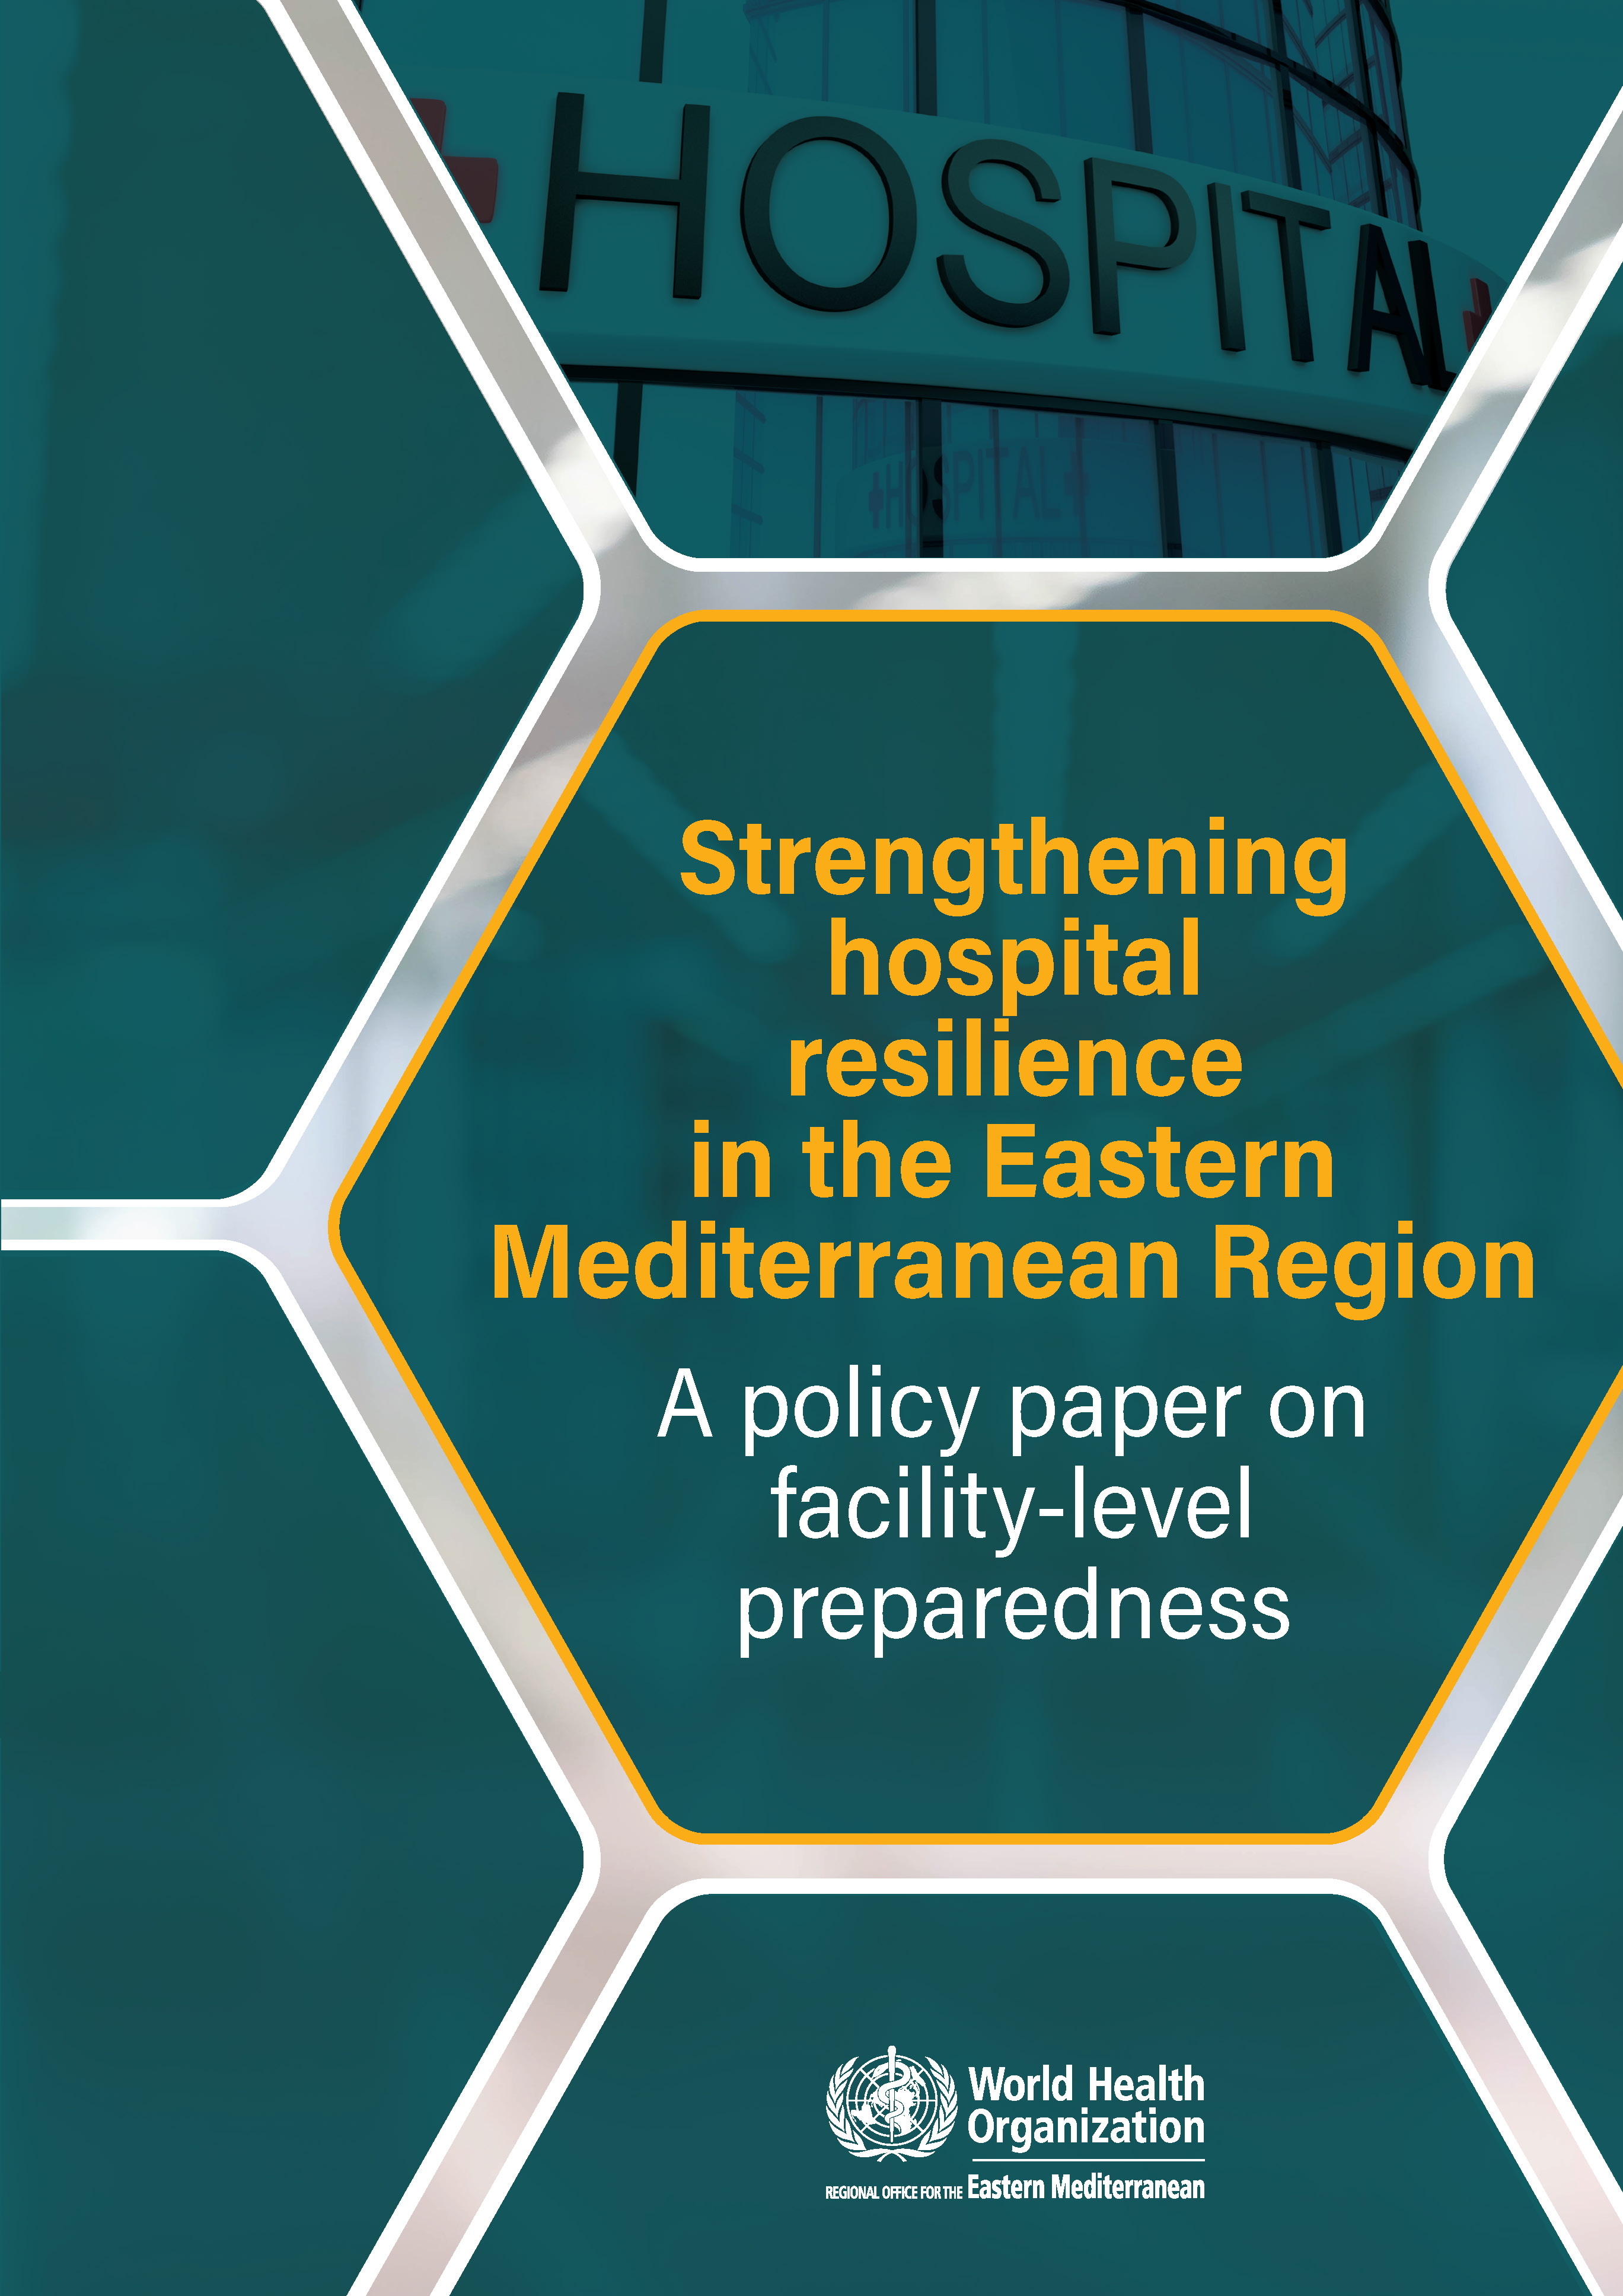 Strengthening hospital resilience in the Eastern Mediterranean Region: a policy paper on facility-level preparedness